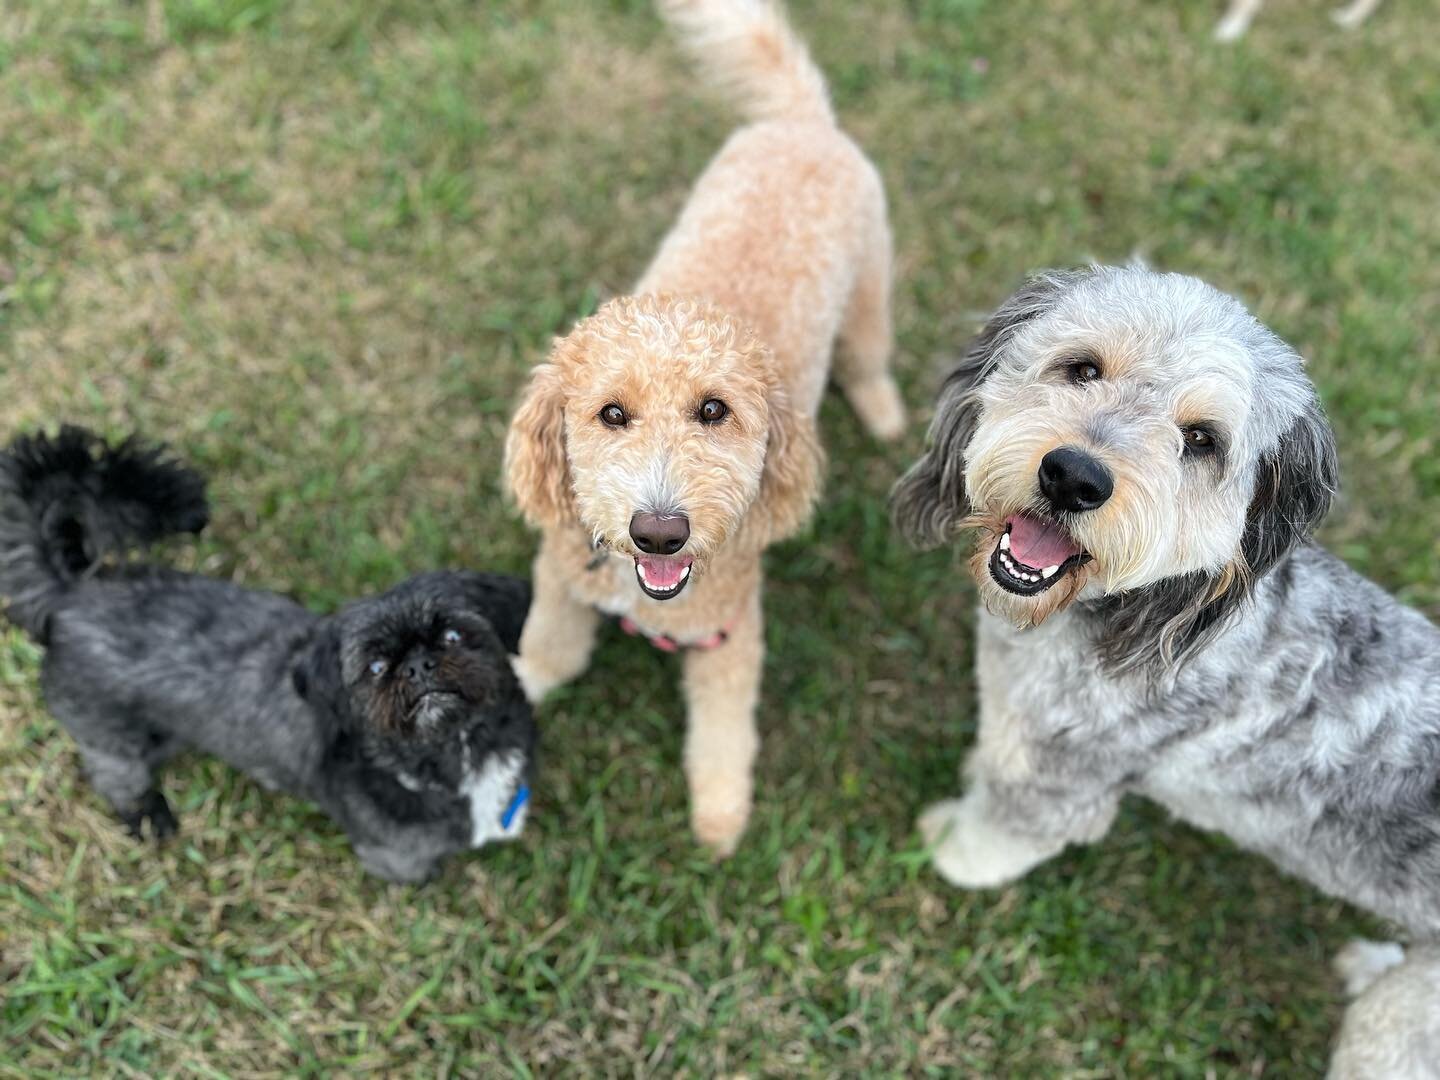 What better way to start the day, than with #friends?! 🐶🐾 Meatball, Daisy and Cavall love running around on the walks!
#thepack #dogwalking #bff #dogs #dogwalkerlife #dogwalks #summer #happydog #aotp #summervibes